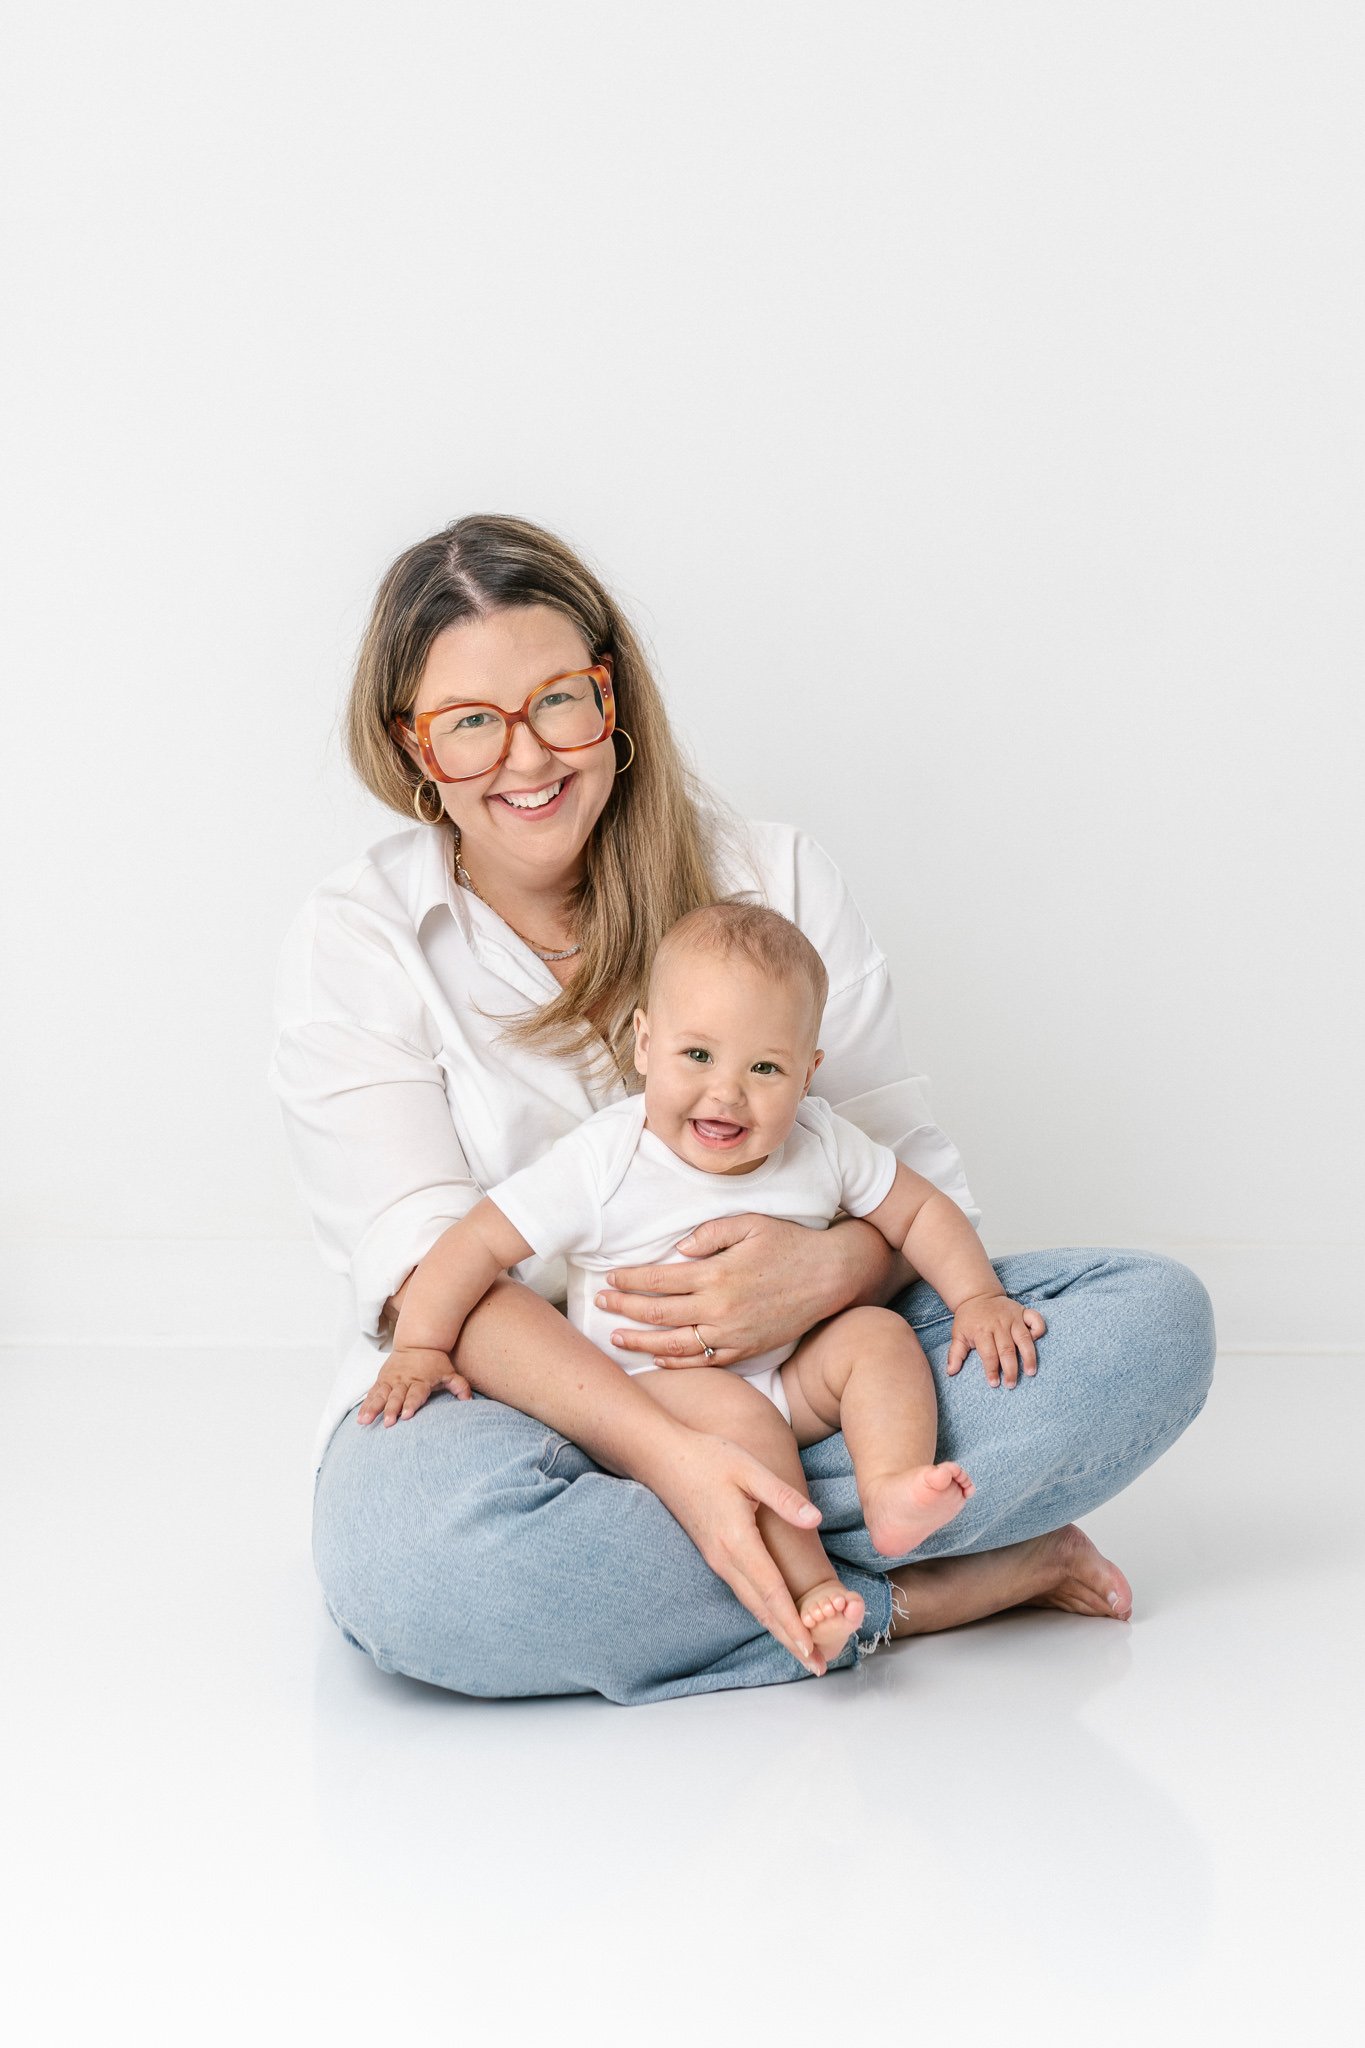  A mother wearing a white shirt and jeans holds her baby on her lap for a timeless, classic, modern portrait by Nicole Hawkins Photography. classic outfits timeless outfits #NicoleHawkinsPhotography #NicoleHawkinsNewborns #studionewborns #studioportr